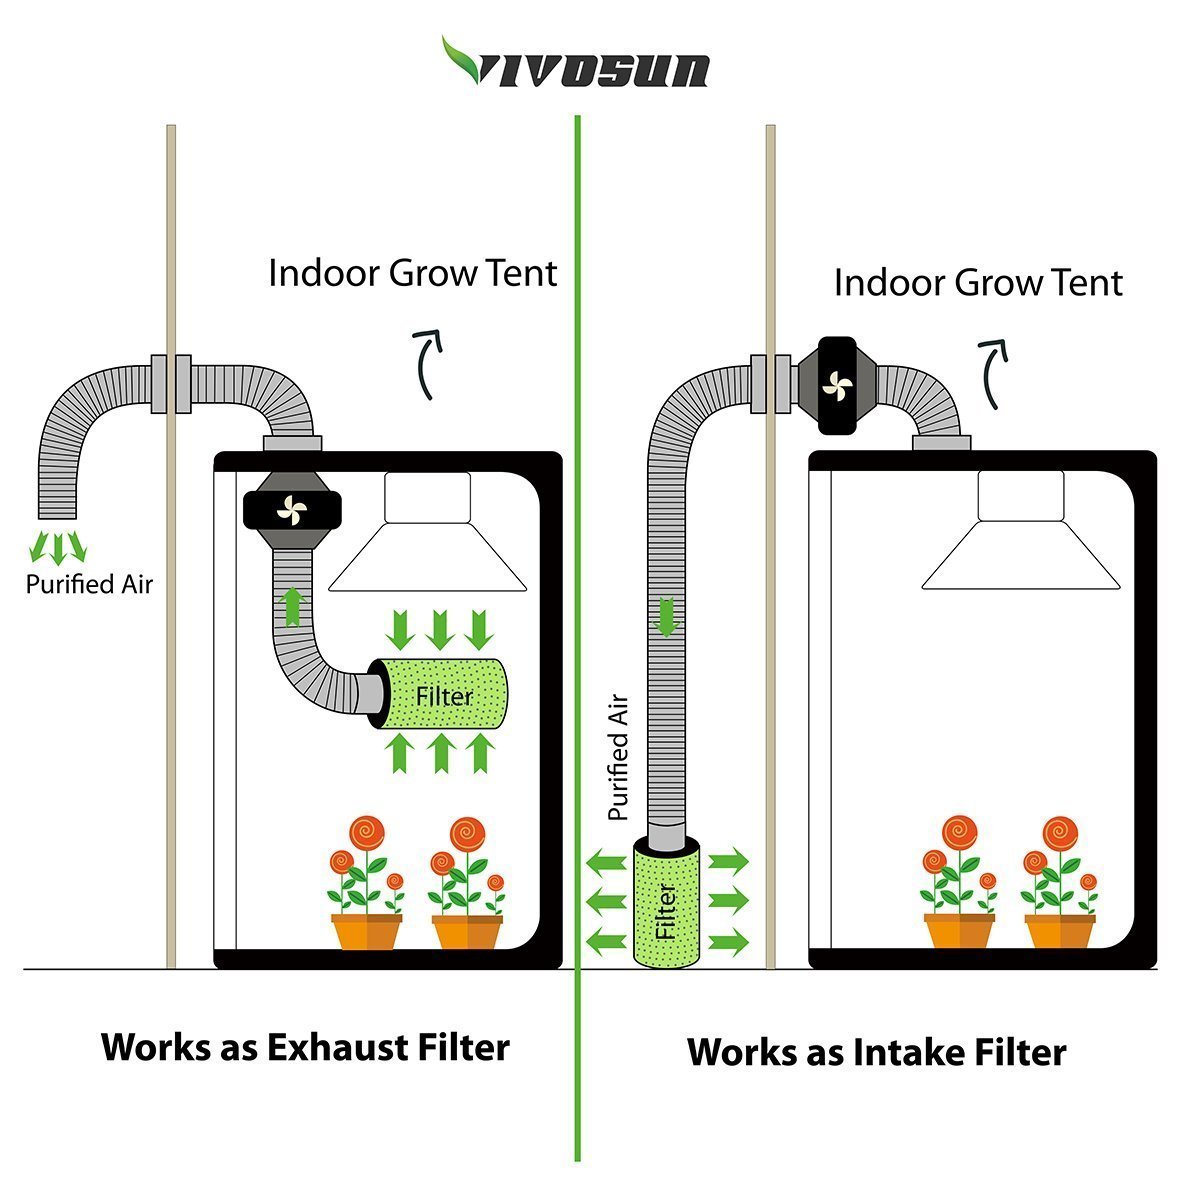 VIVOSUN 8 Inch Air Carbon Filter Odor Control with Australia Virgin Charcoal for Inline Fan, Grow Tent Odor Scrubber, Pre-filter Included, Reversible Flange 8" x 22" - $78.95